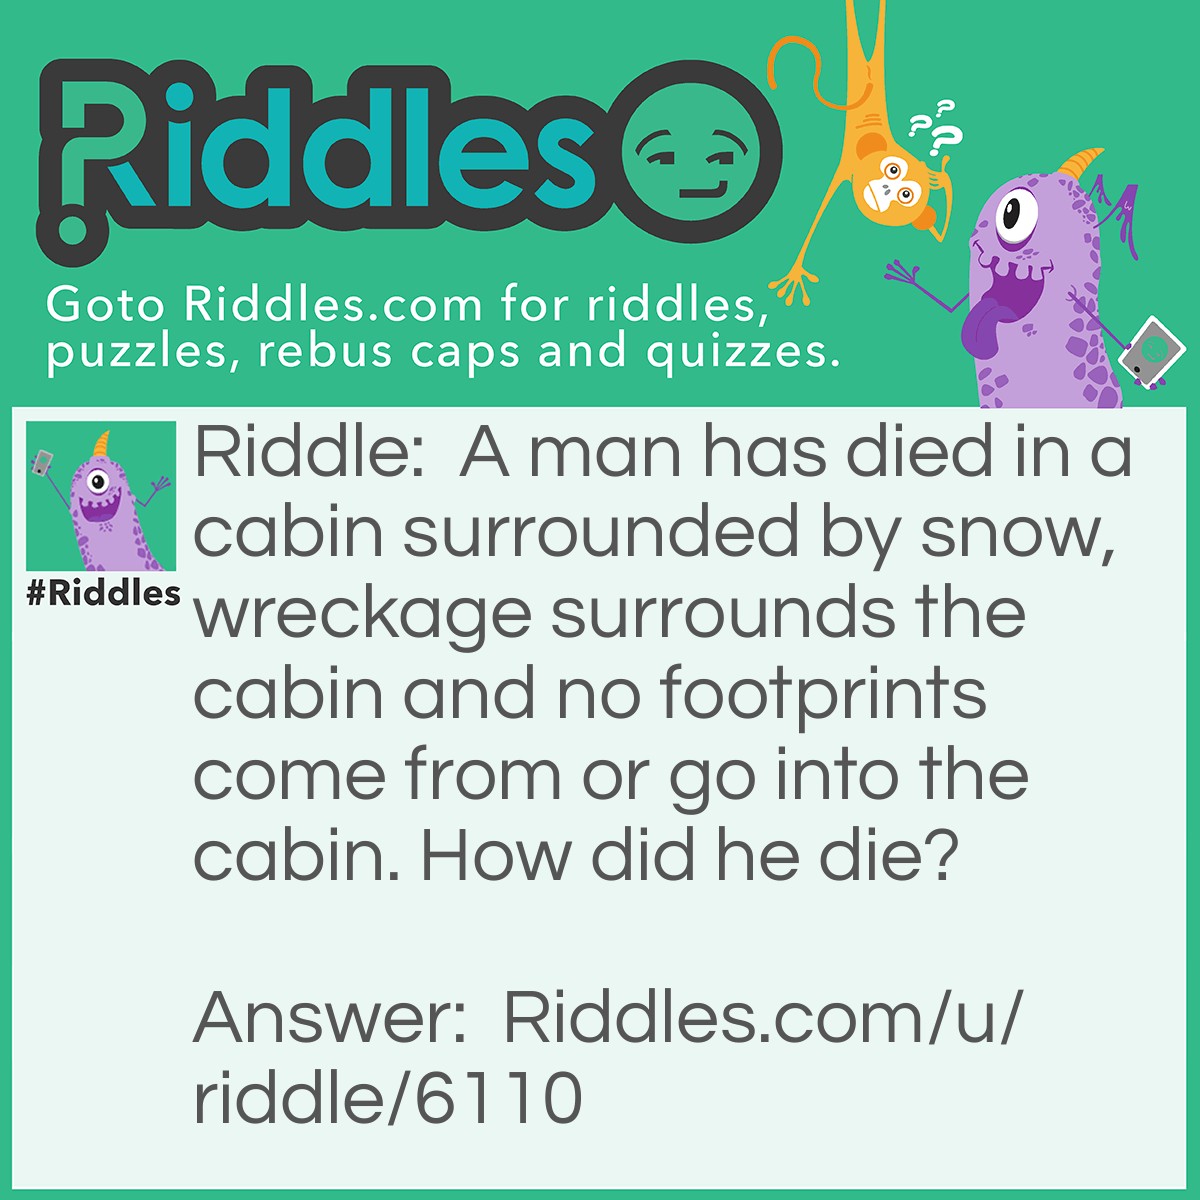 Riddle: A man has died in a cabin surrounded by snow, wreckage surrounds the cabin and no footprints come from or go into the cabin. How did he die? Answer: He died in a plane crash, he was in the cabin of the plane when he died.